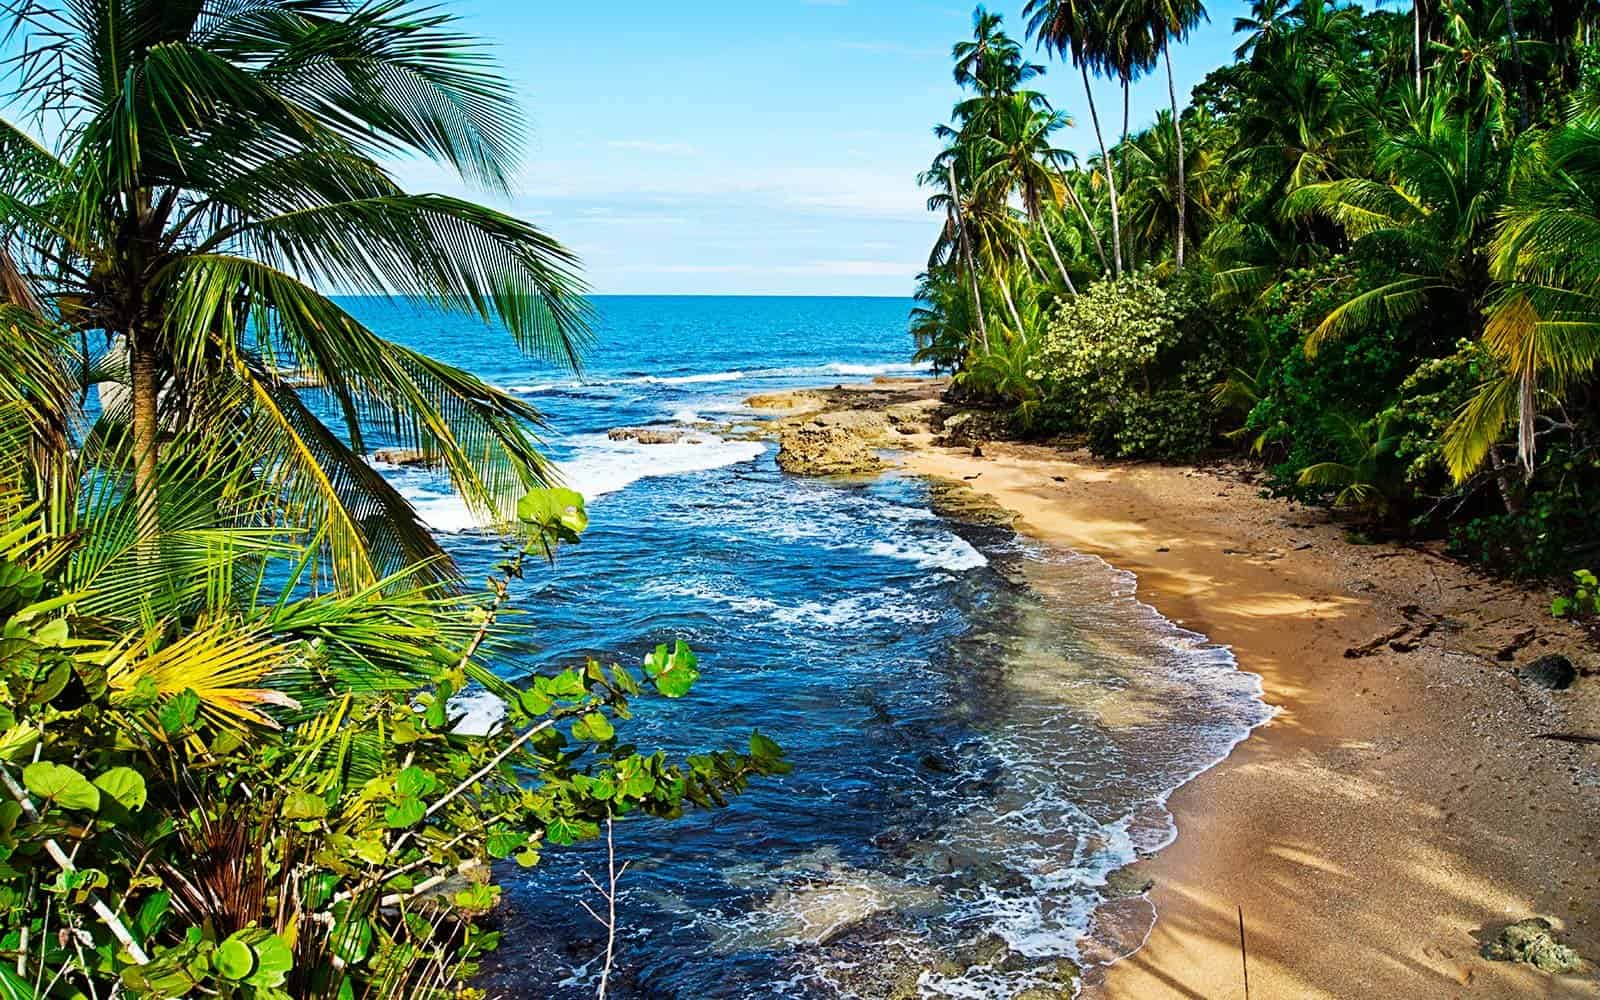 Living In Costa Rica: Top 5 Locations to Consider in 2021 - Escape